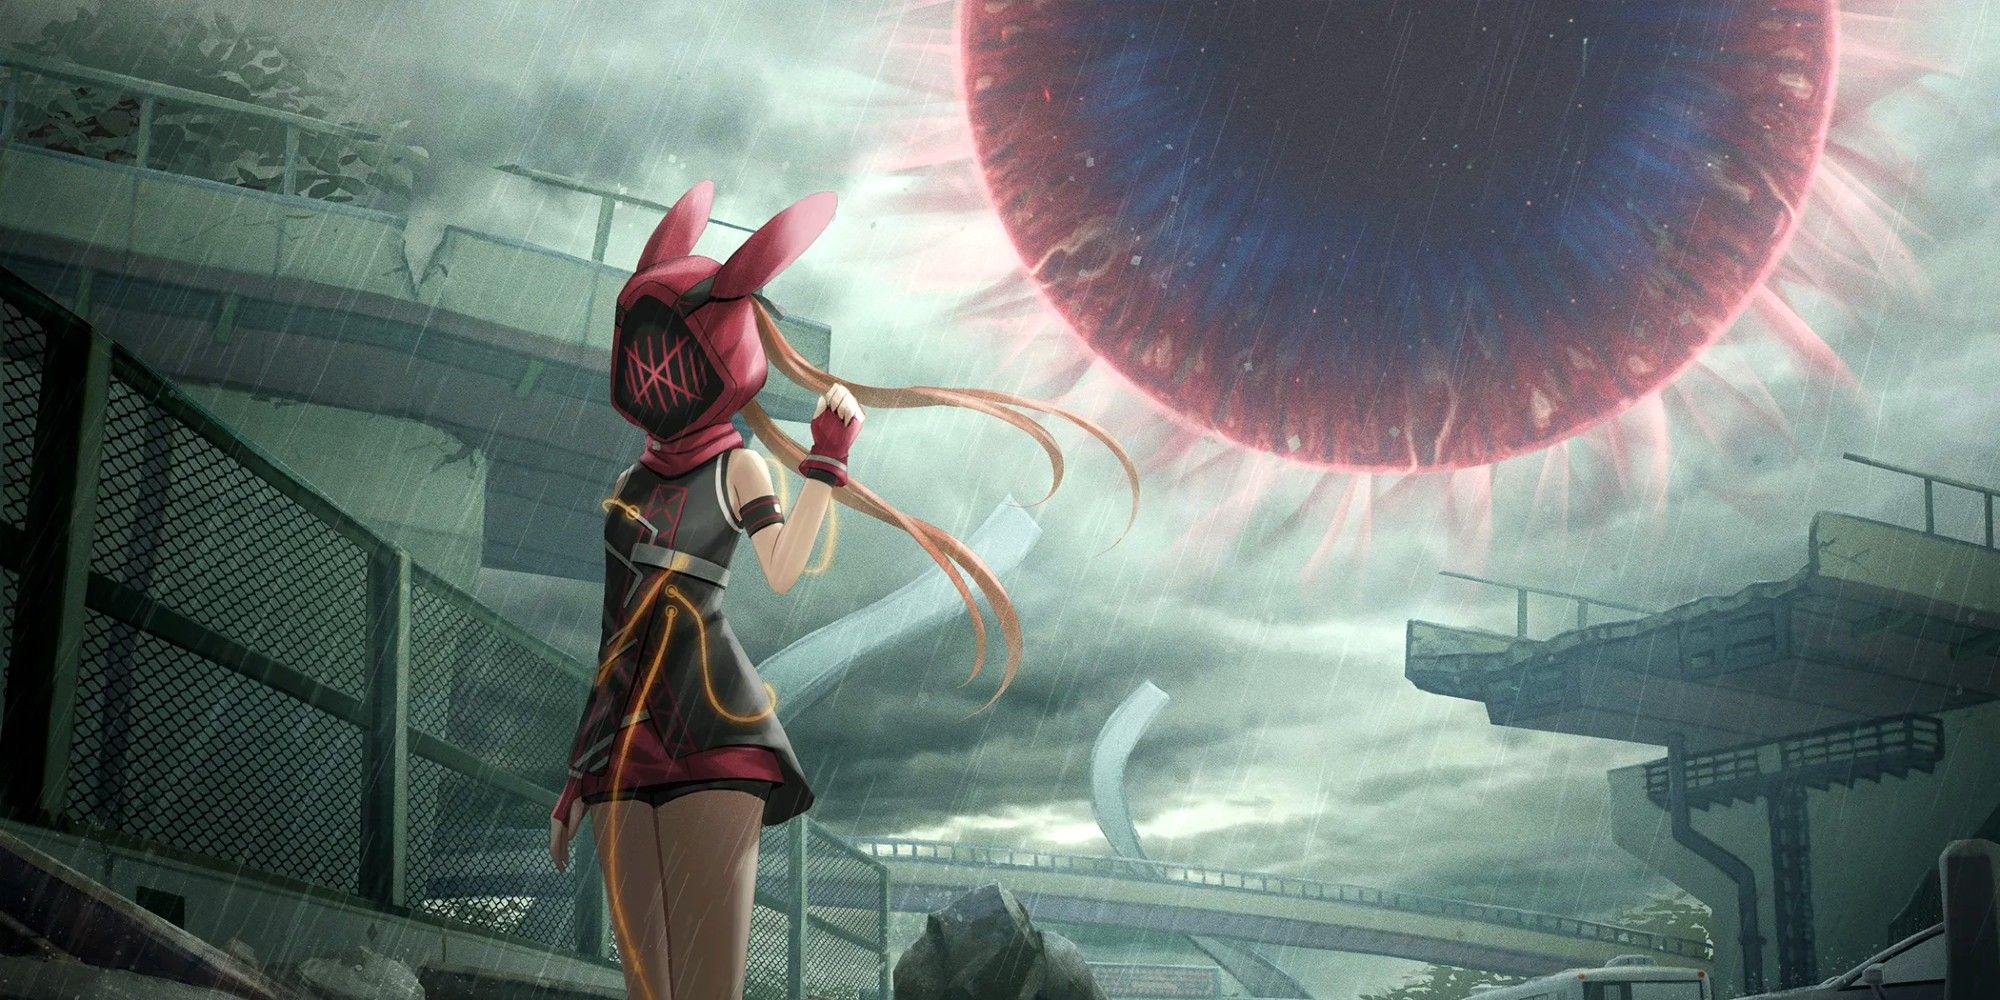 Kunad Gate Scarlet Nexus girl stands in front facing away from death gate above her